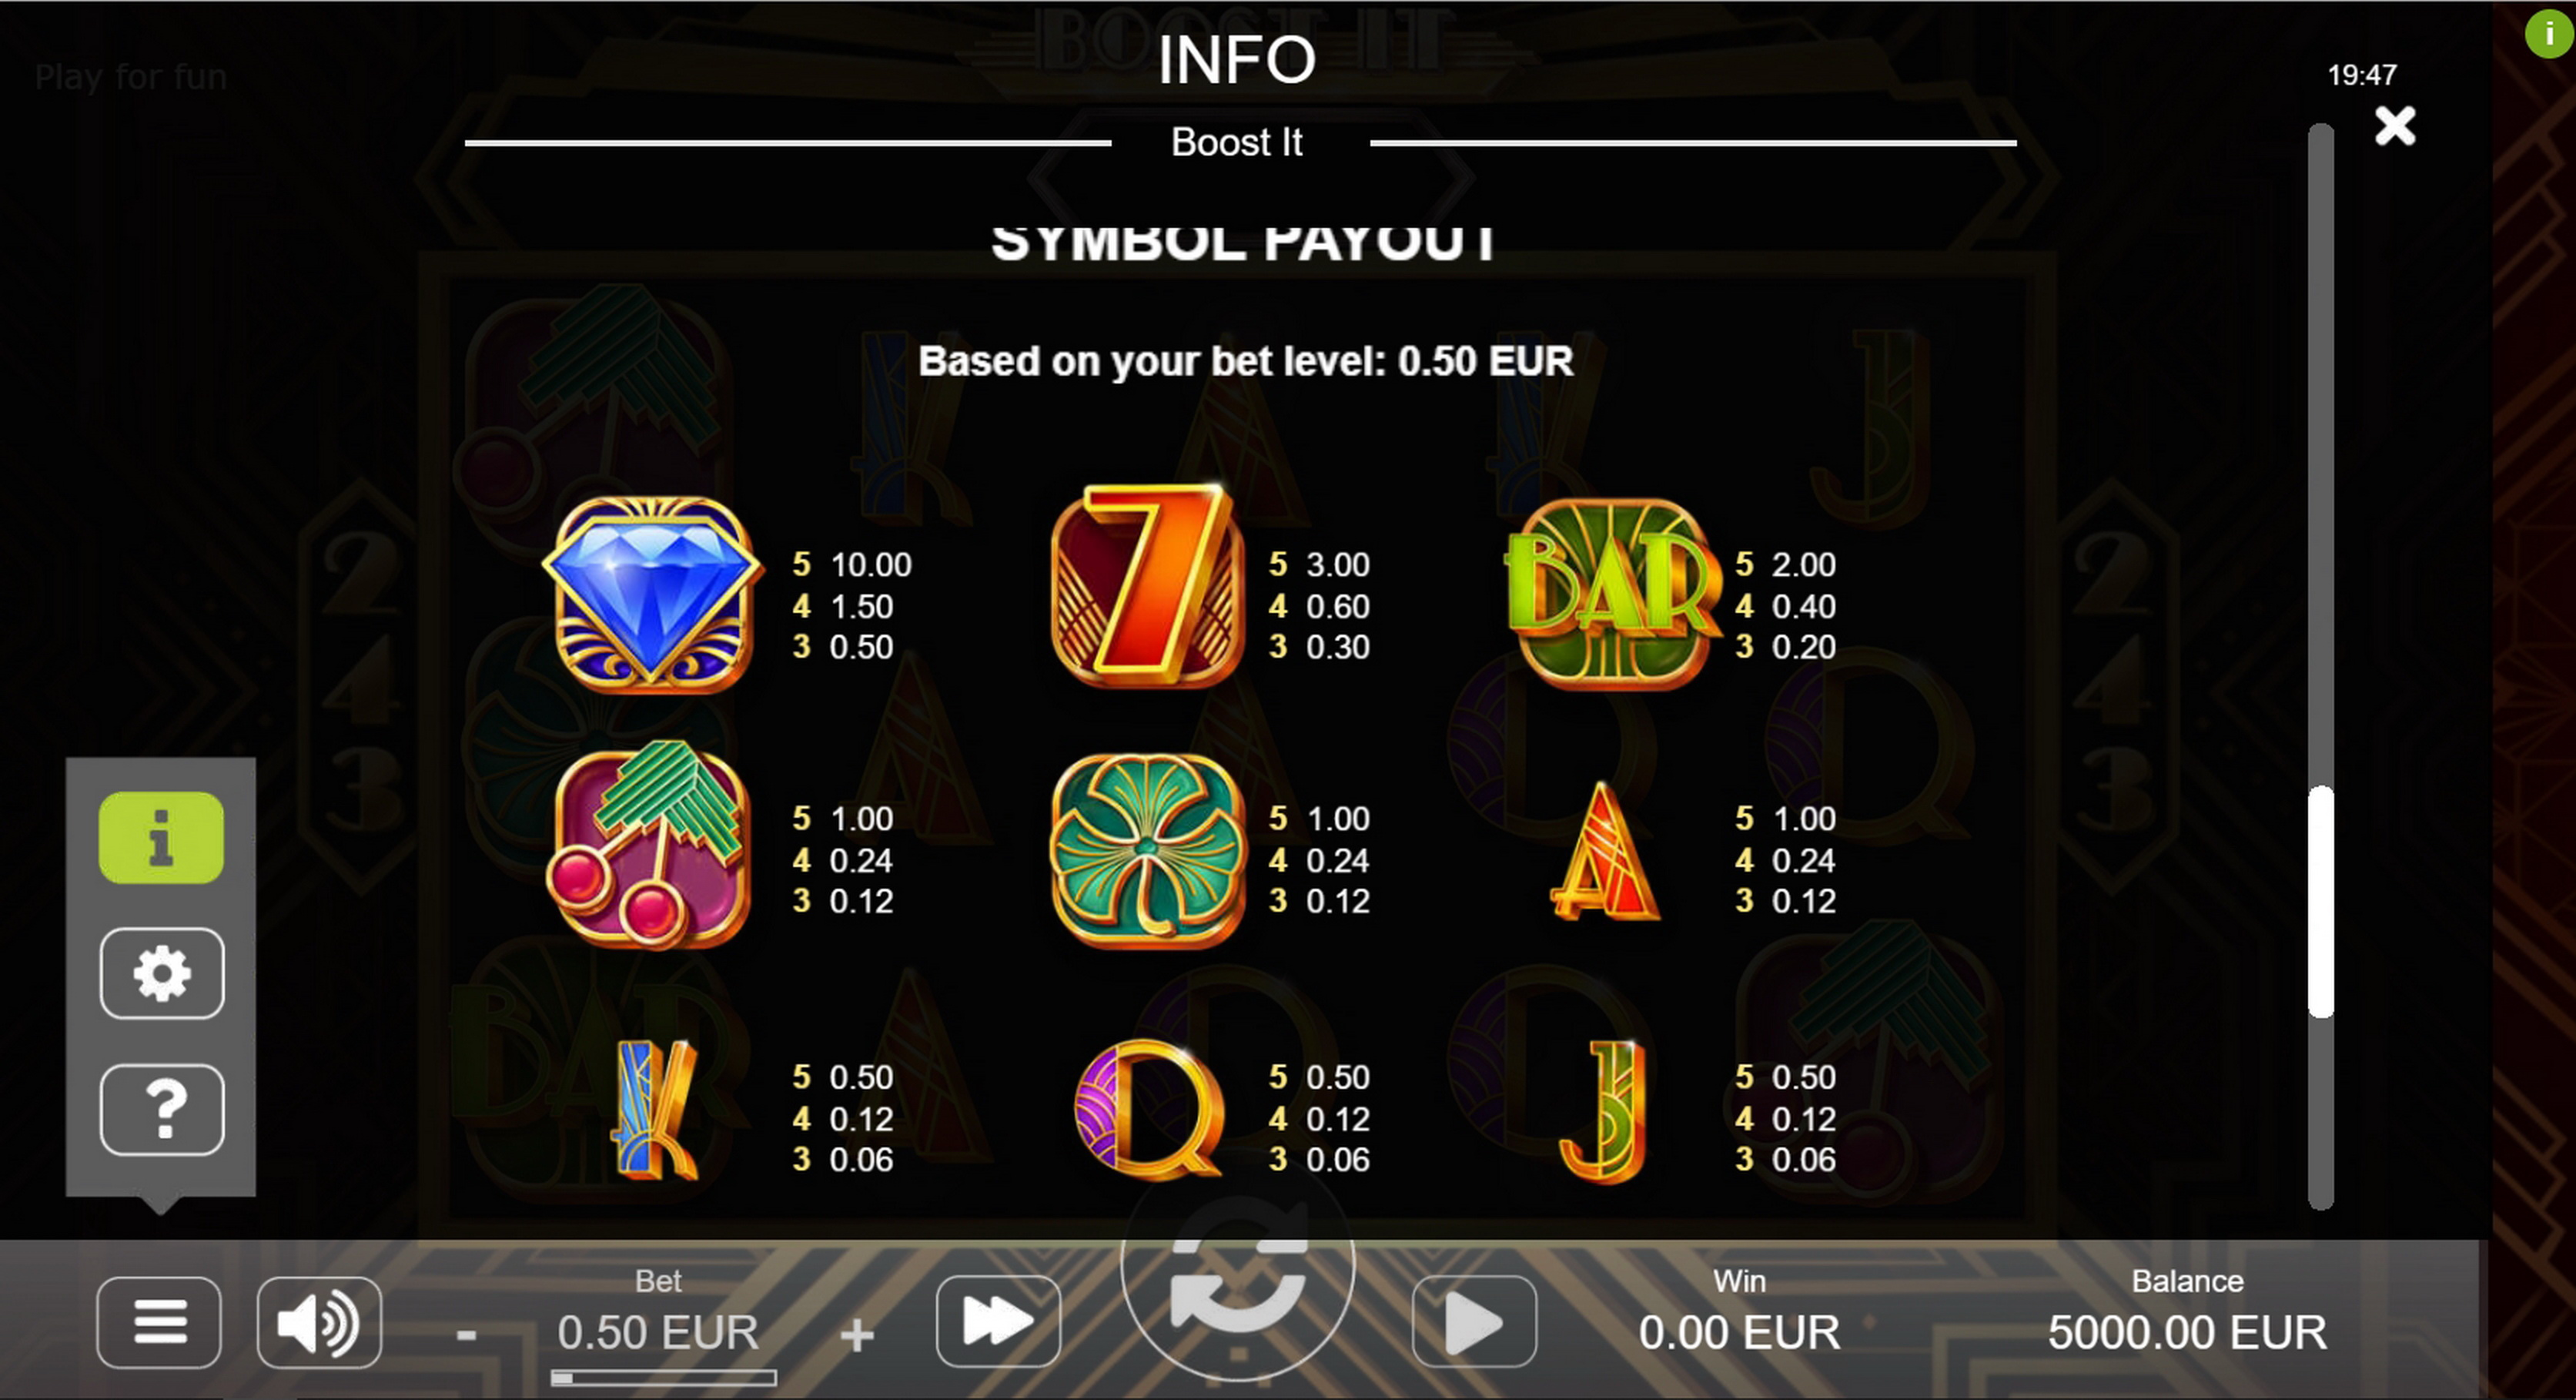 Info of Boost It Slot Game by STHLM Gaming